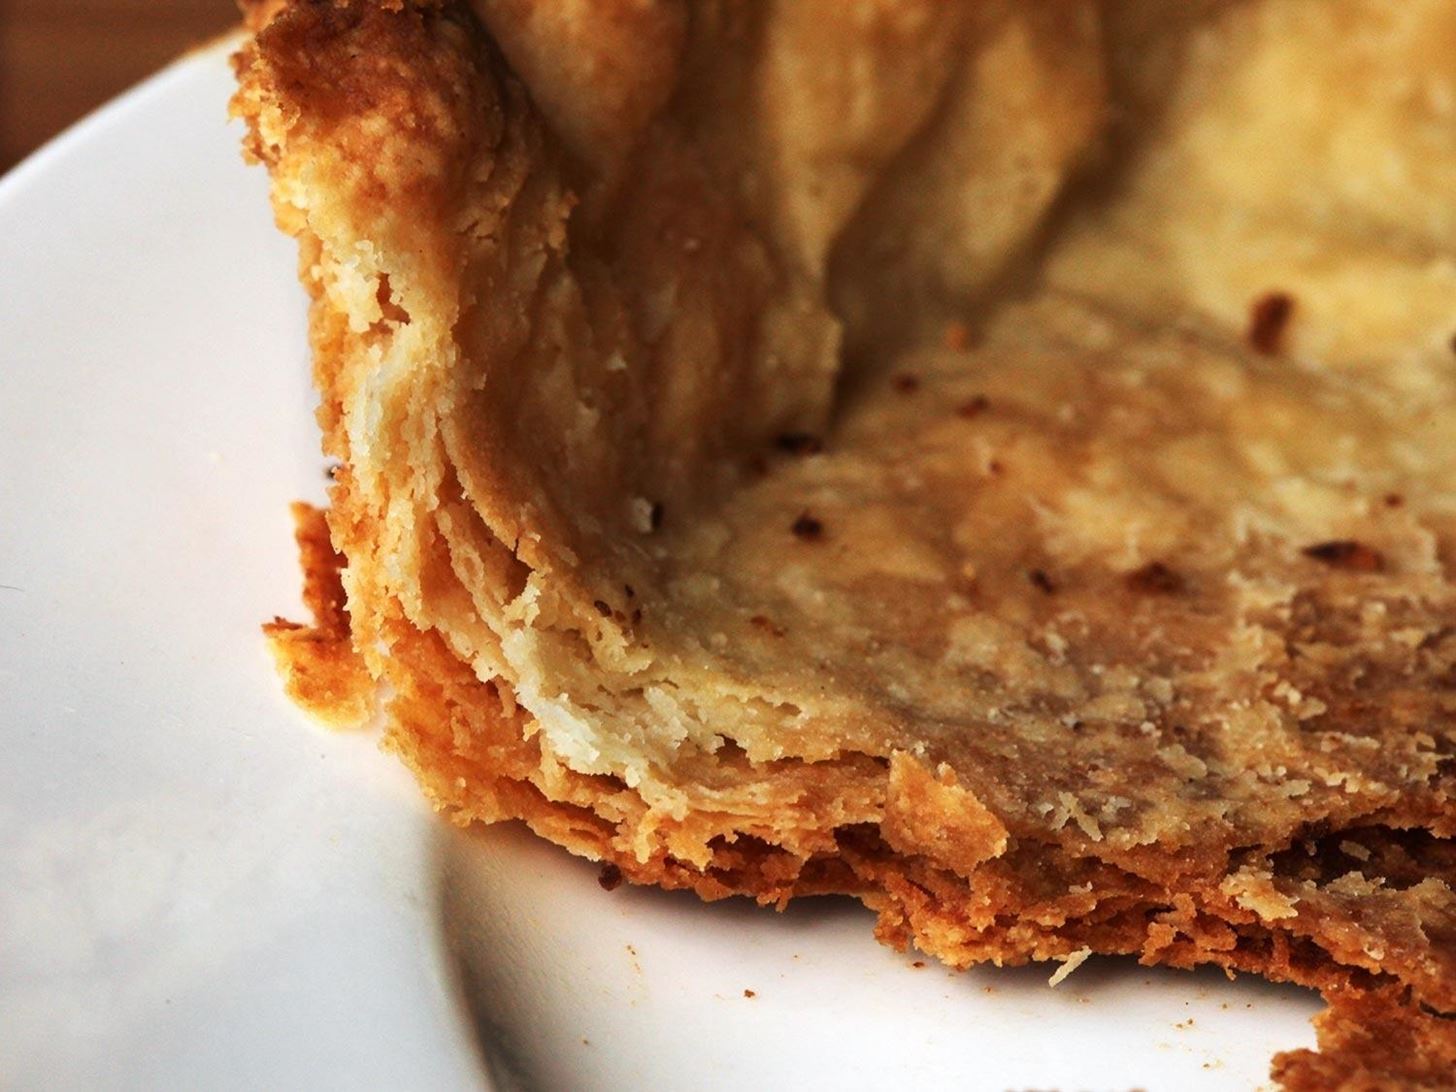 Liquor Up Your Pie Crusts to Make Them Flaky AF